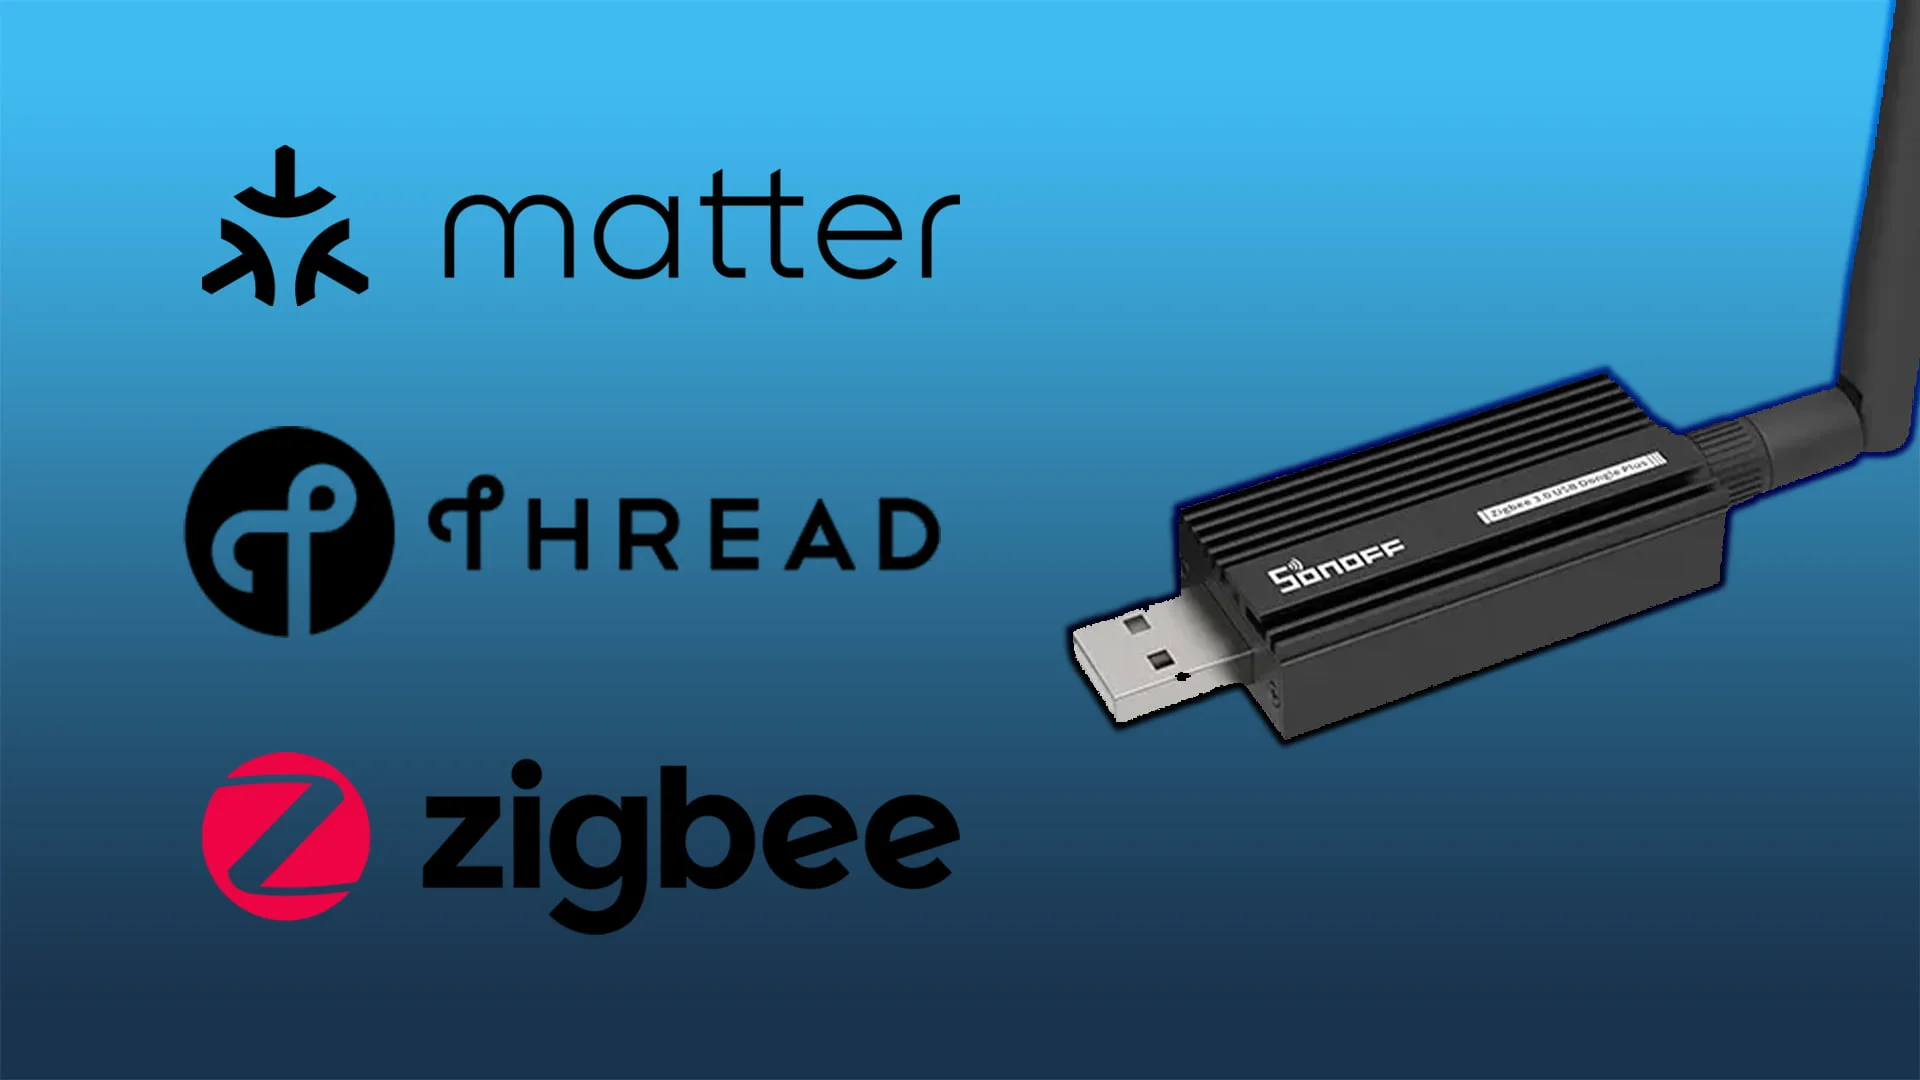 SONOFF ZigBee 3.0 USB Dongle Plus is released now!!! : r/sonoff